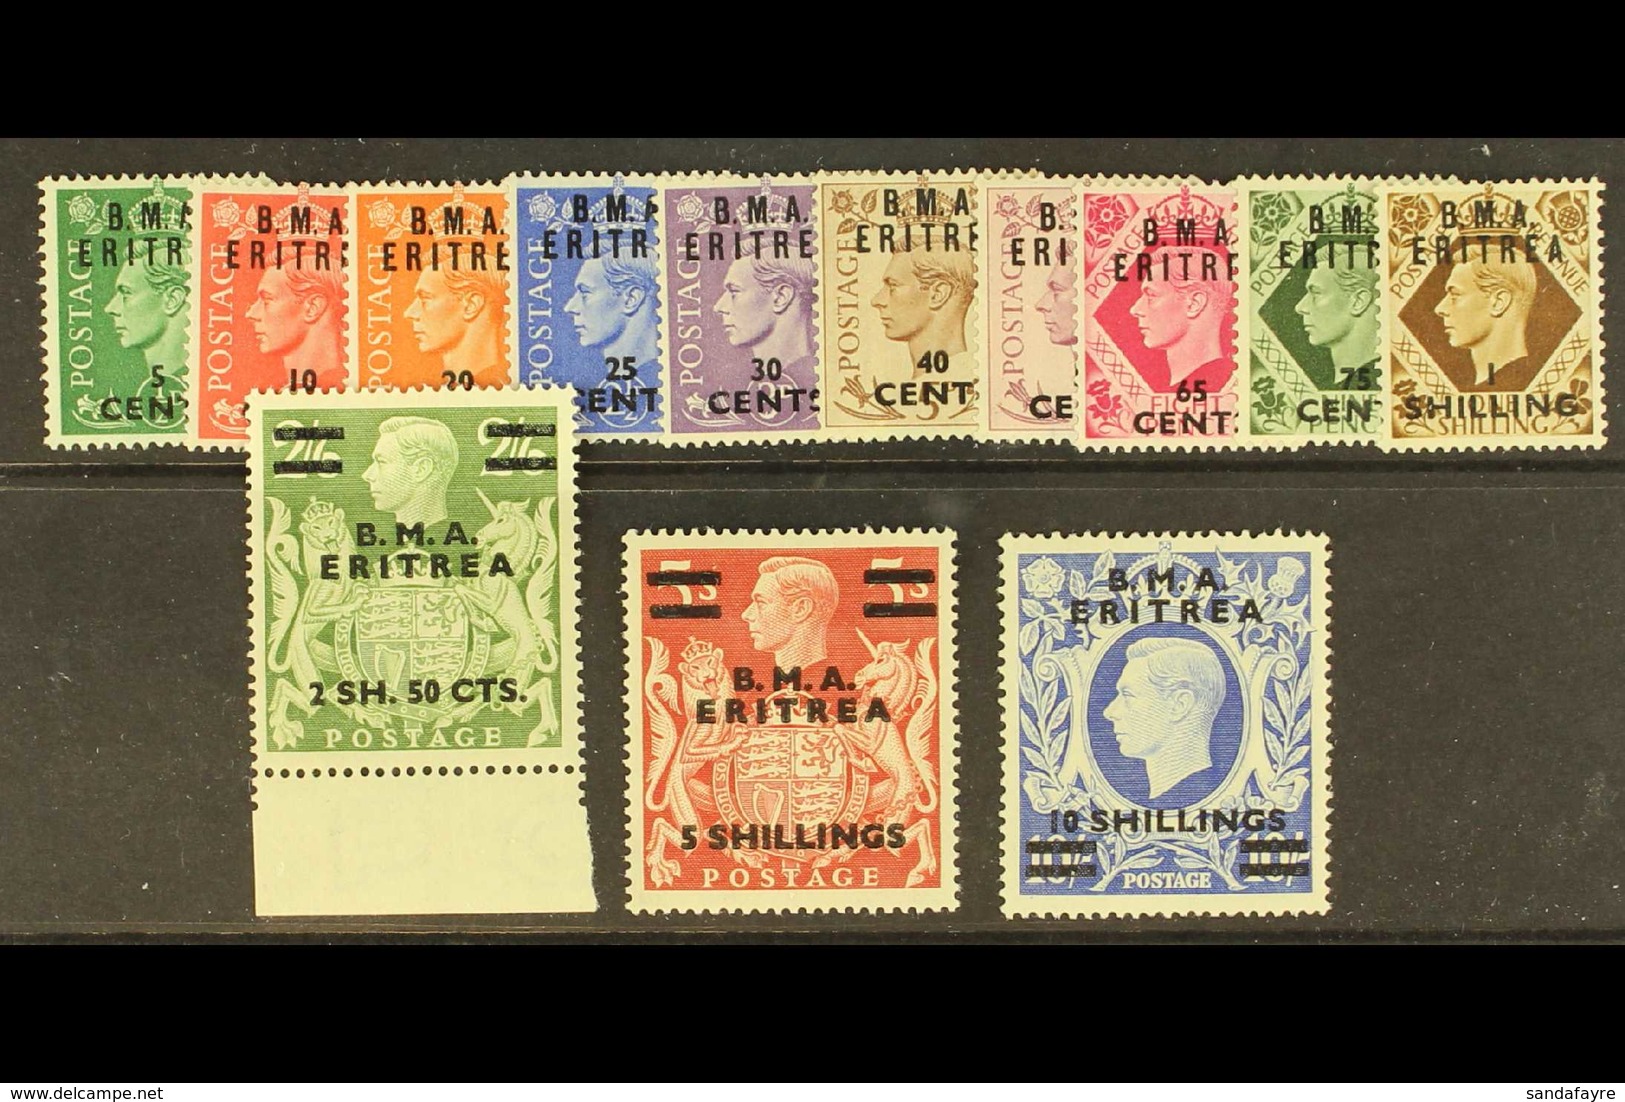 ERITREA 1948 B.M.A. Surcharge Set Complete, SG E1/12, Very Fine Never Hinged Mint. (13 Stamps) For More Images, Please V - Italiaans Oost-Afrika